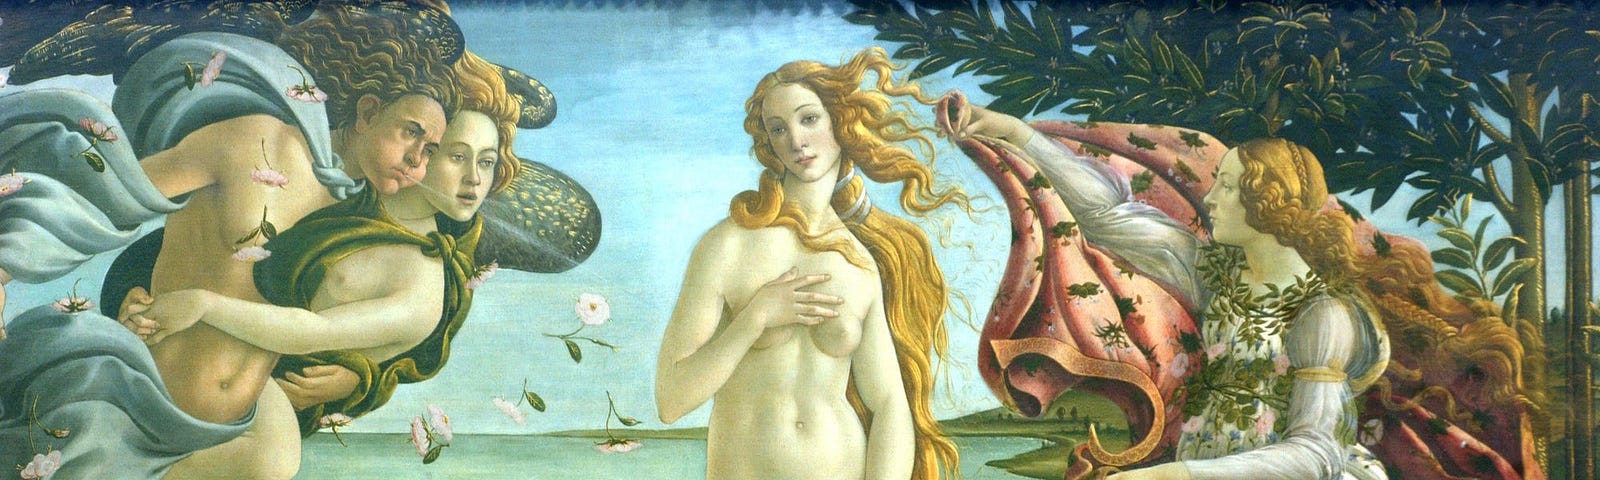 A detail of Sandro Botticelli’s “Birth of Venus” on view at the Uffizi Gallery in Florence, Italy.